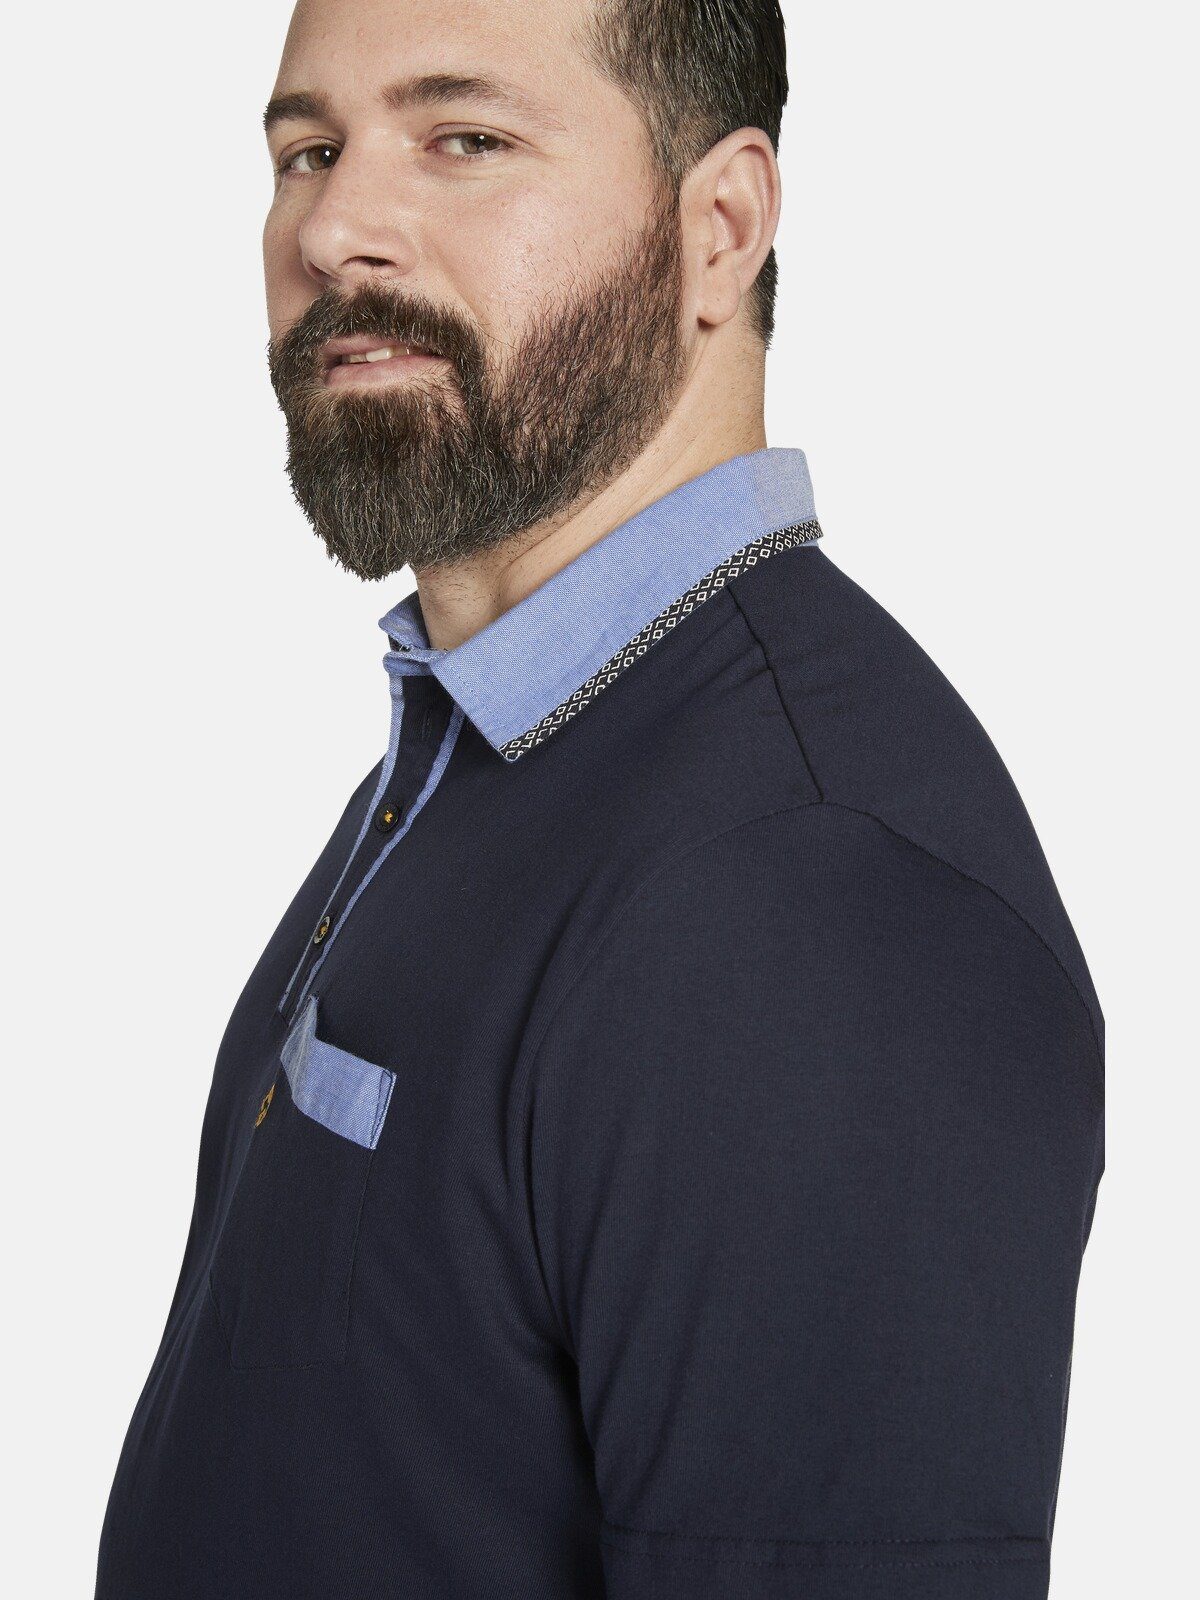 Poloshirt EARL Colby Charles WILLMER